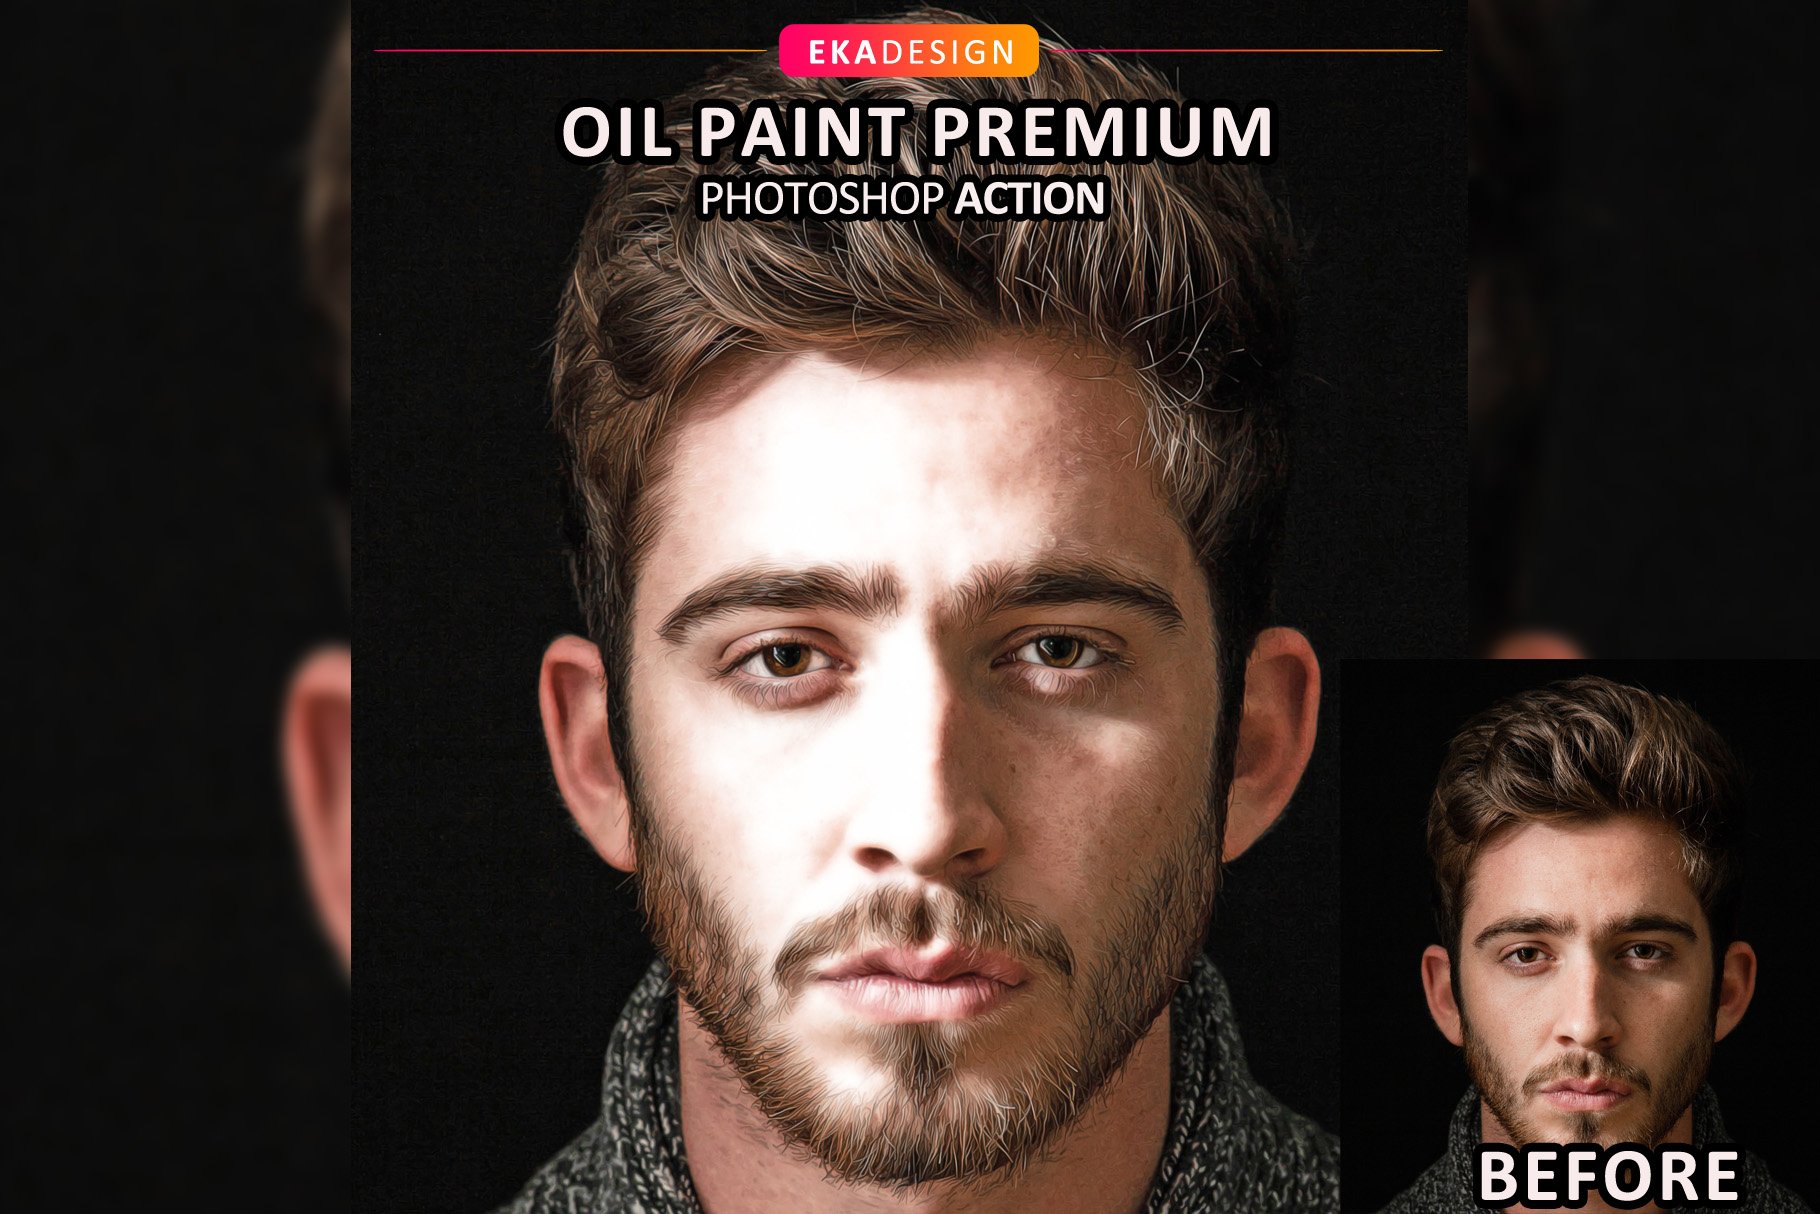 Oil Paint Premiumcover image.